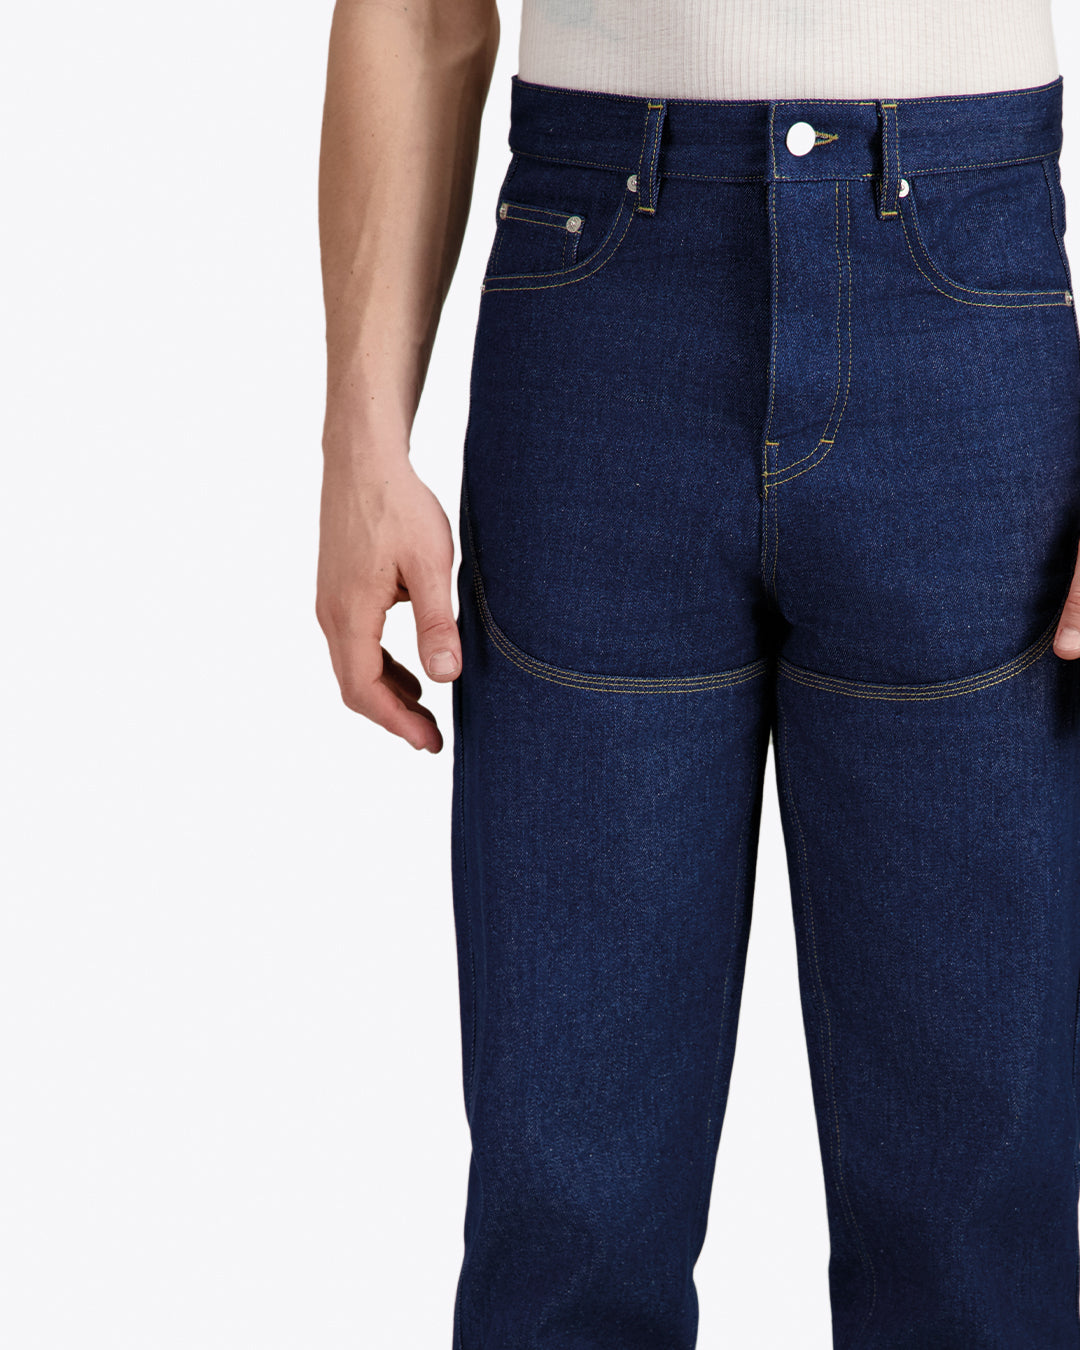 THE COW BOY JEANS IN INDIGO RECYCLED DENIM